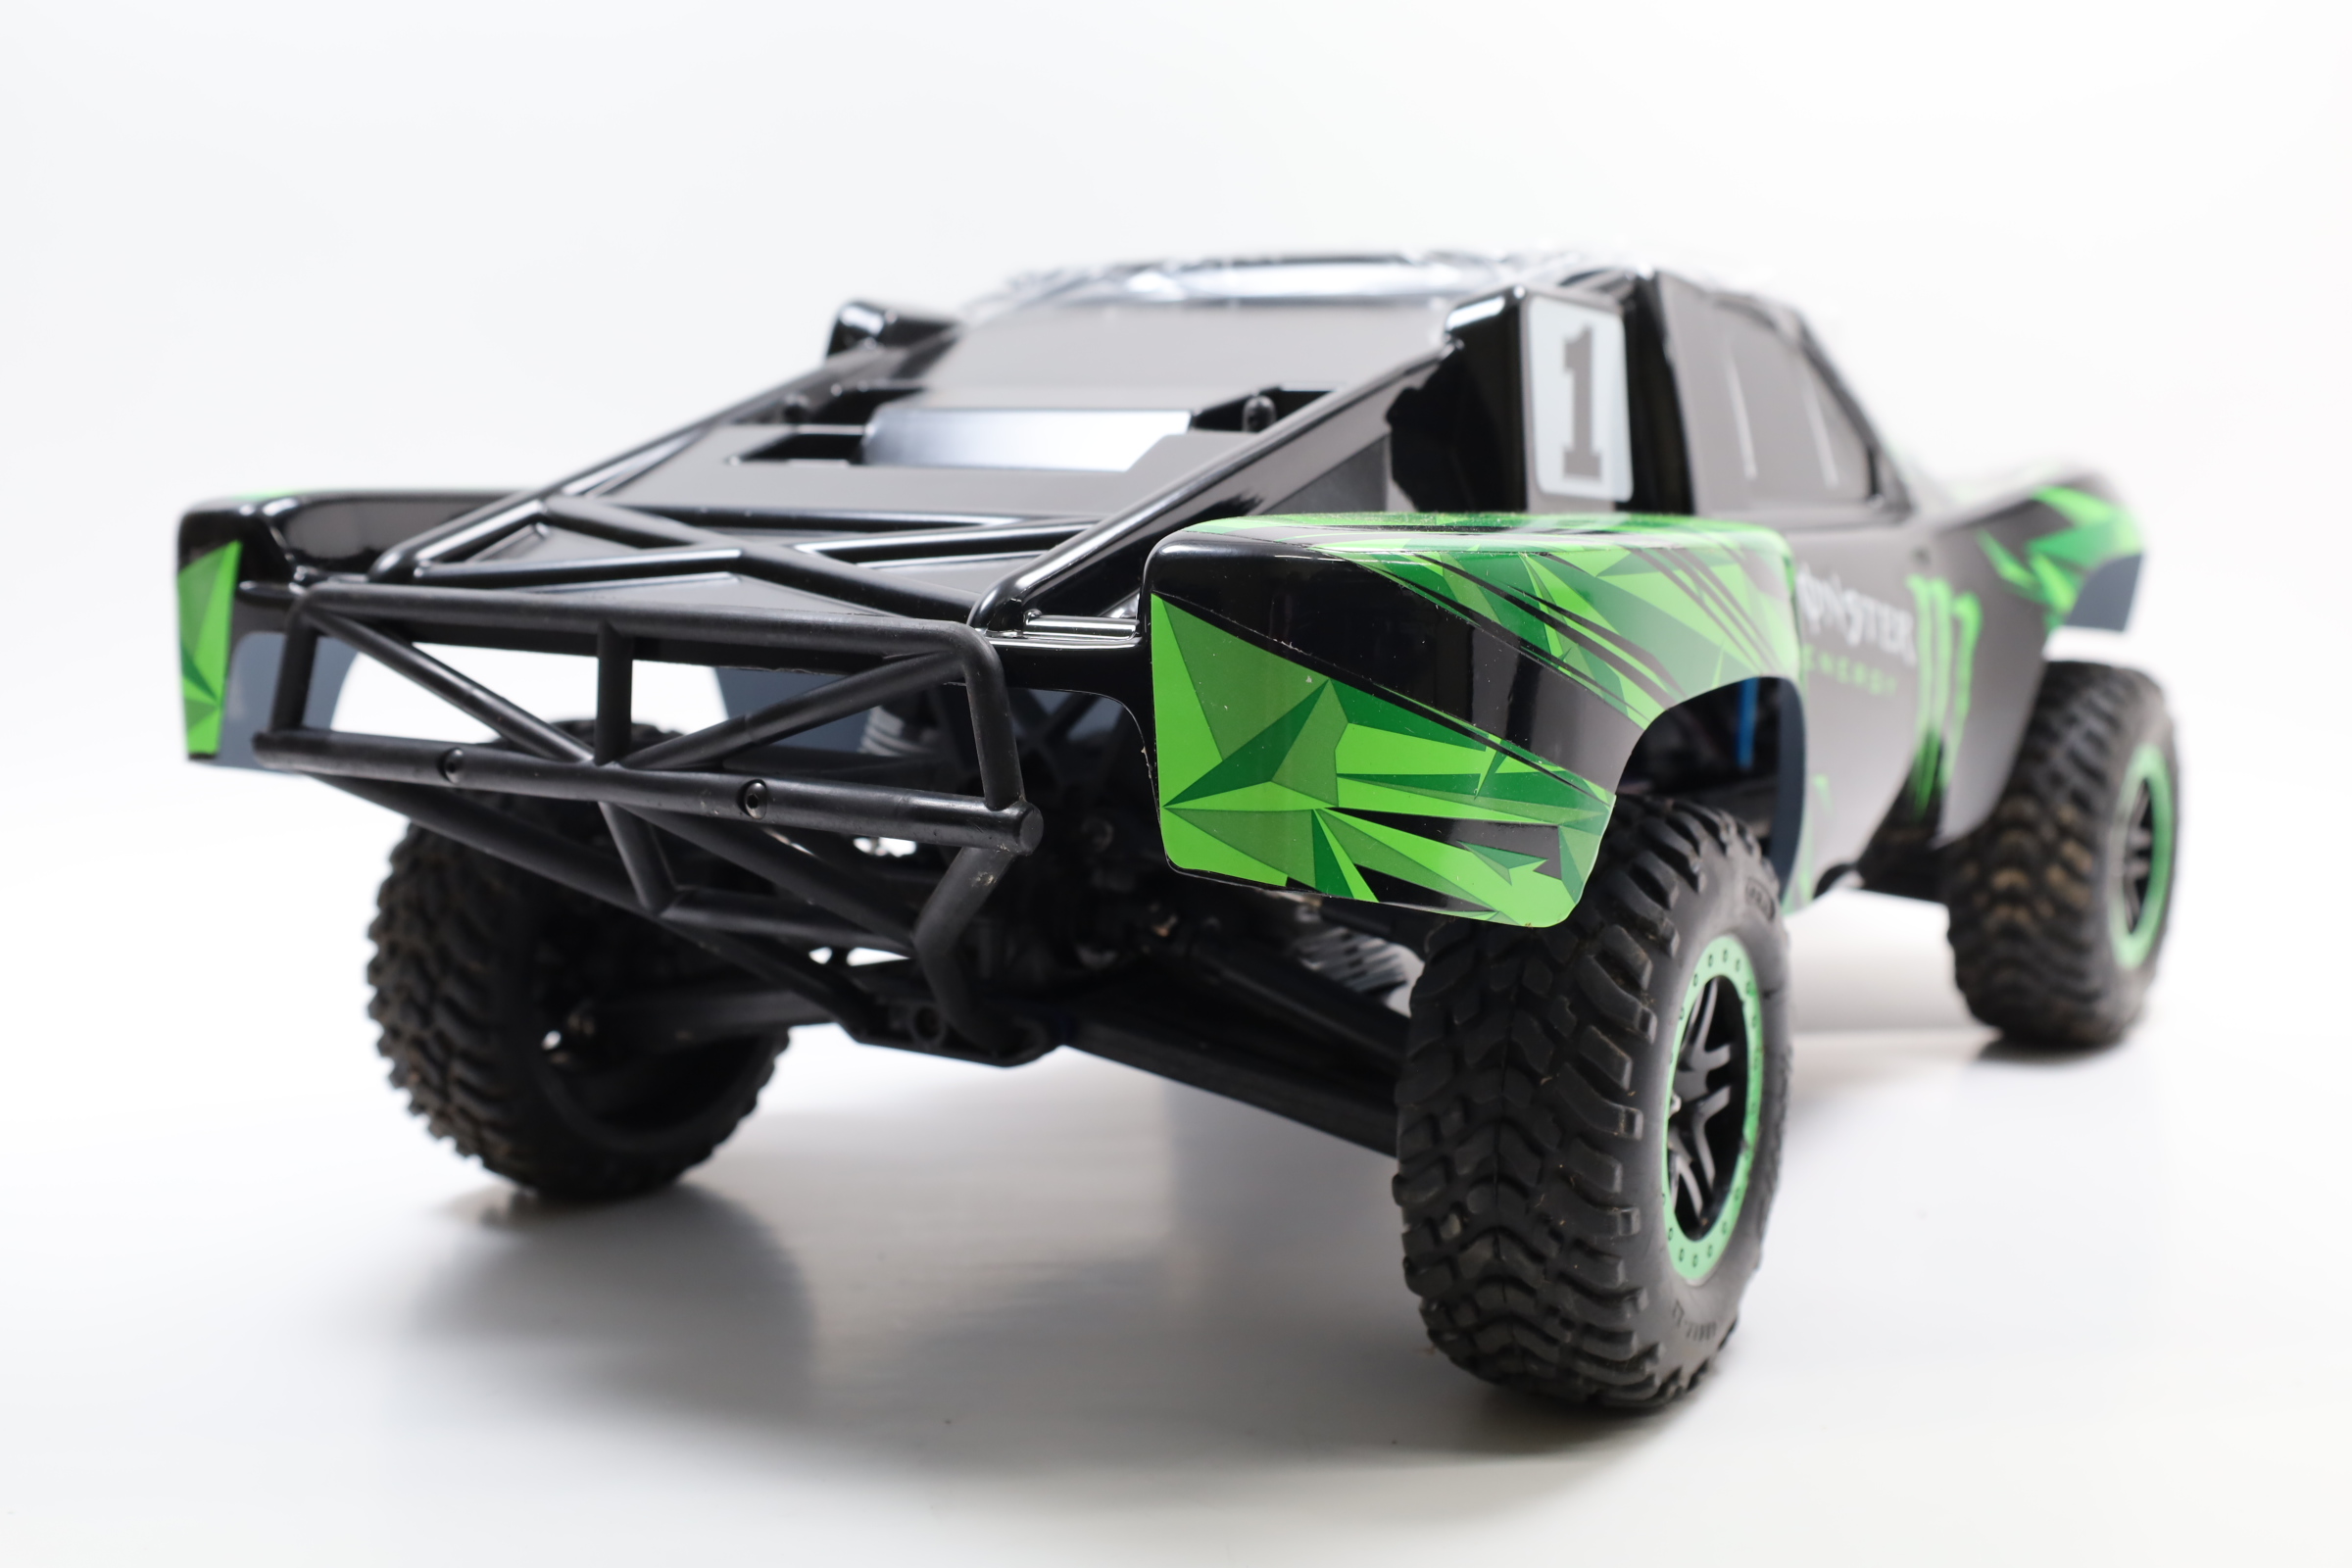 Traxxas Slash 2wd Monster Energy Edition Roller 1/10 Chassis Rc